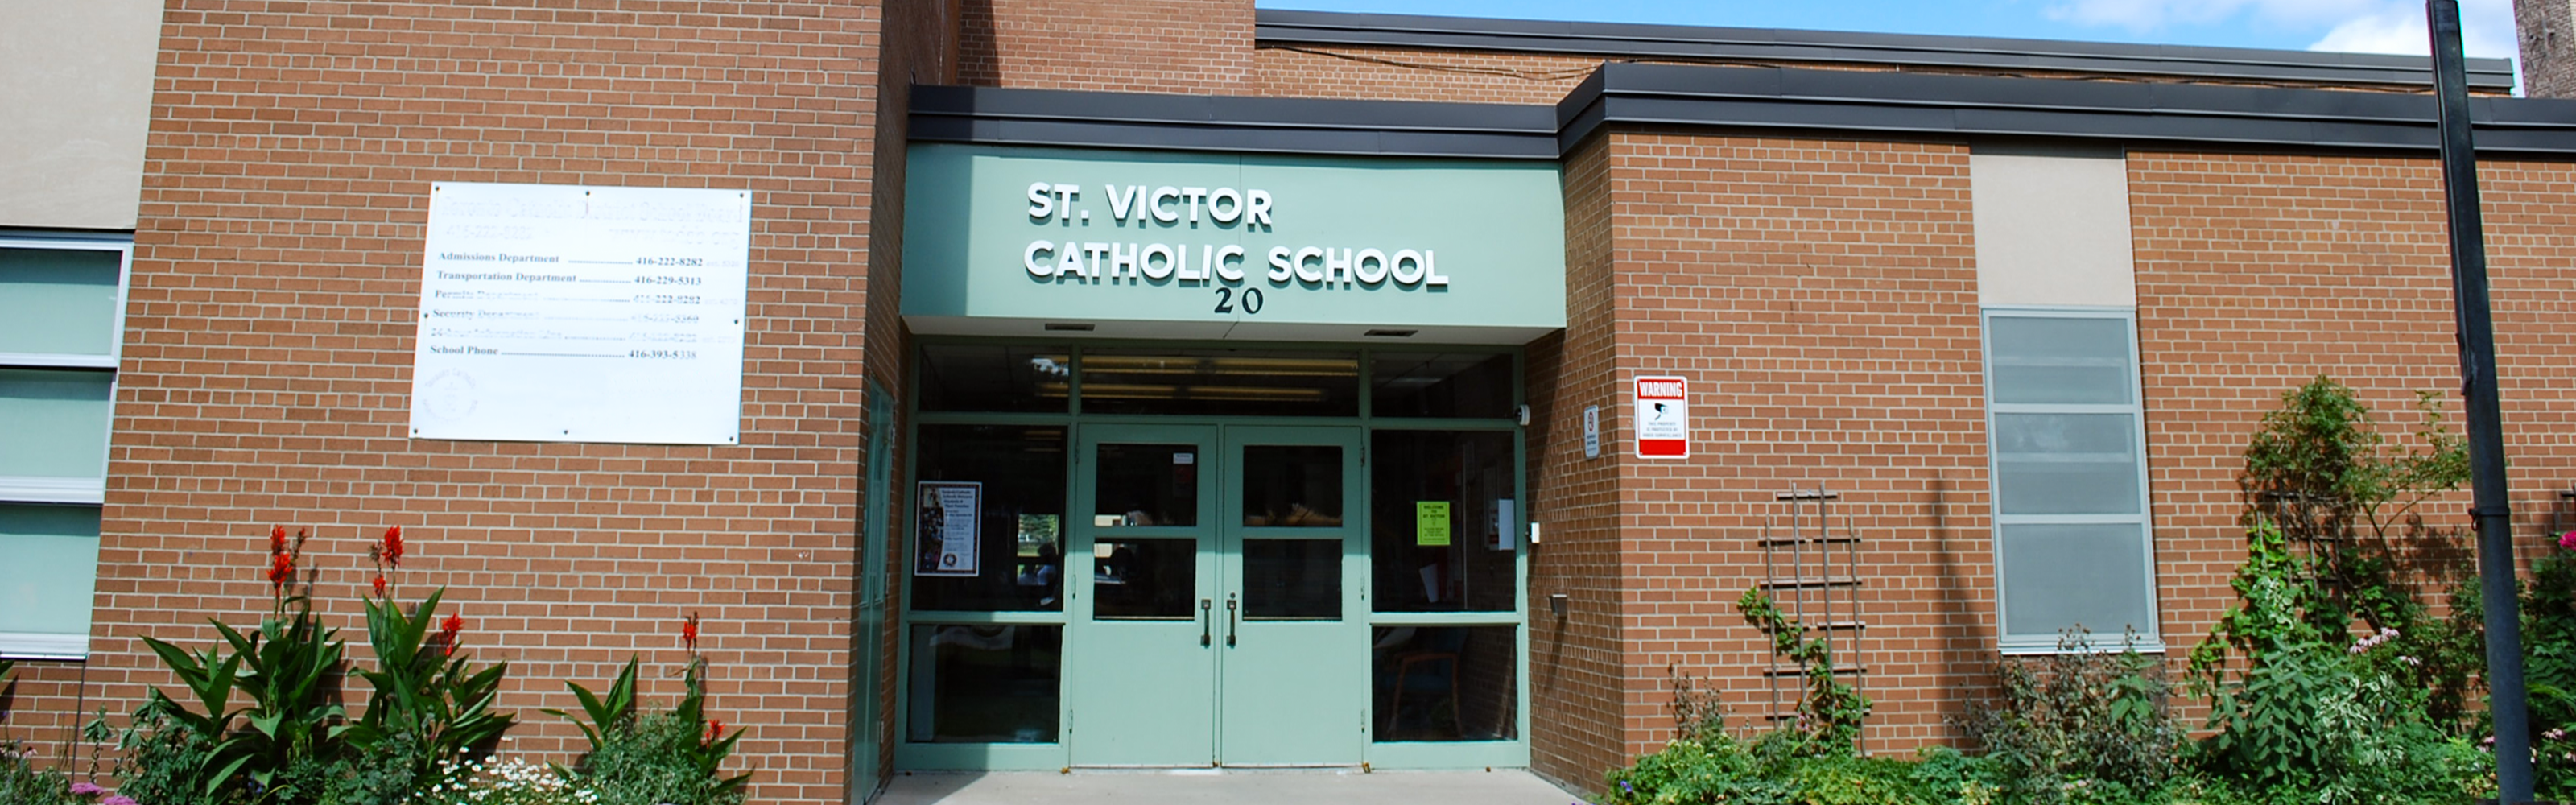 The front of the St. Victor Catholic School building.